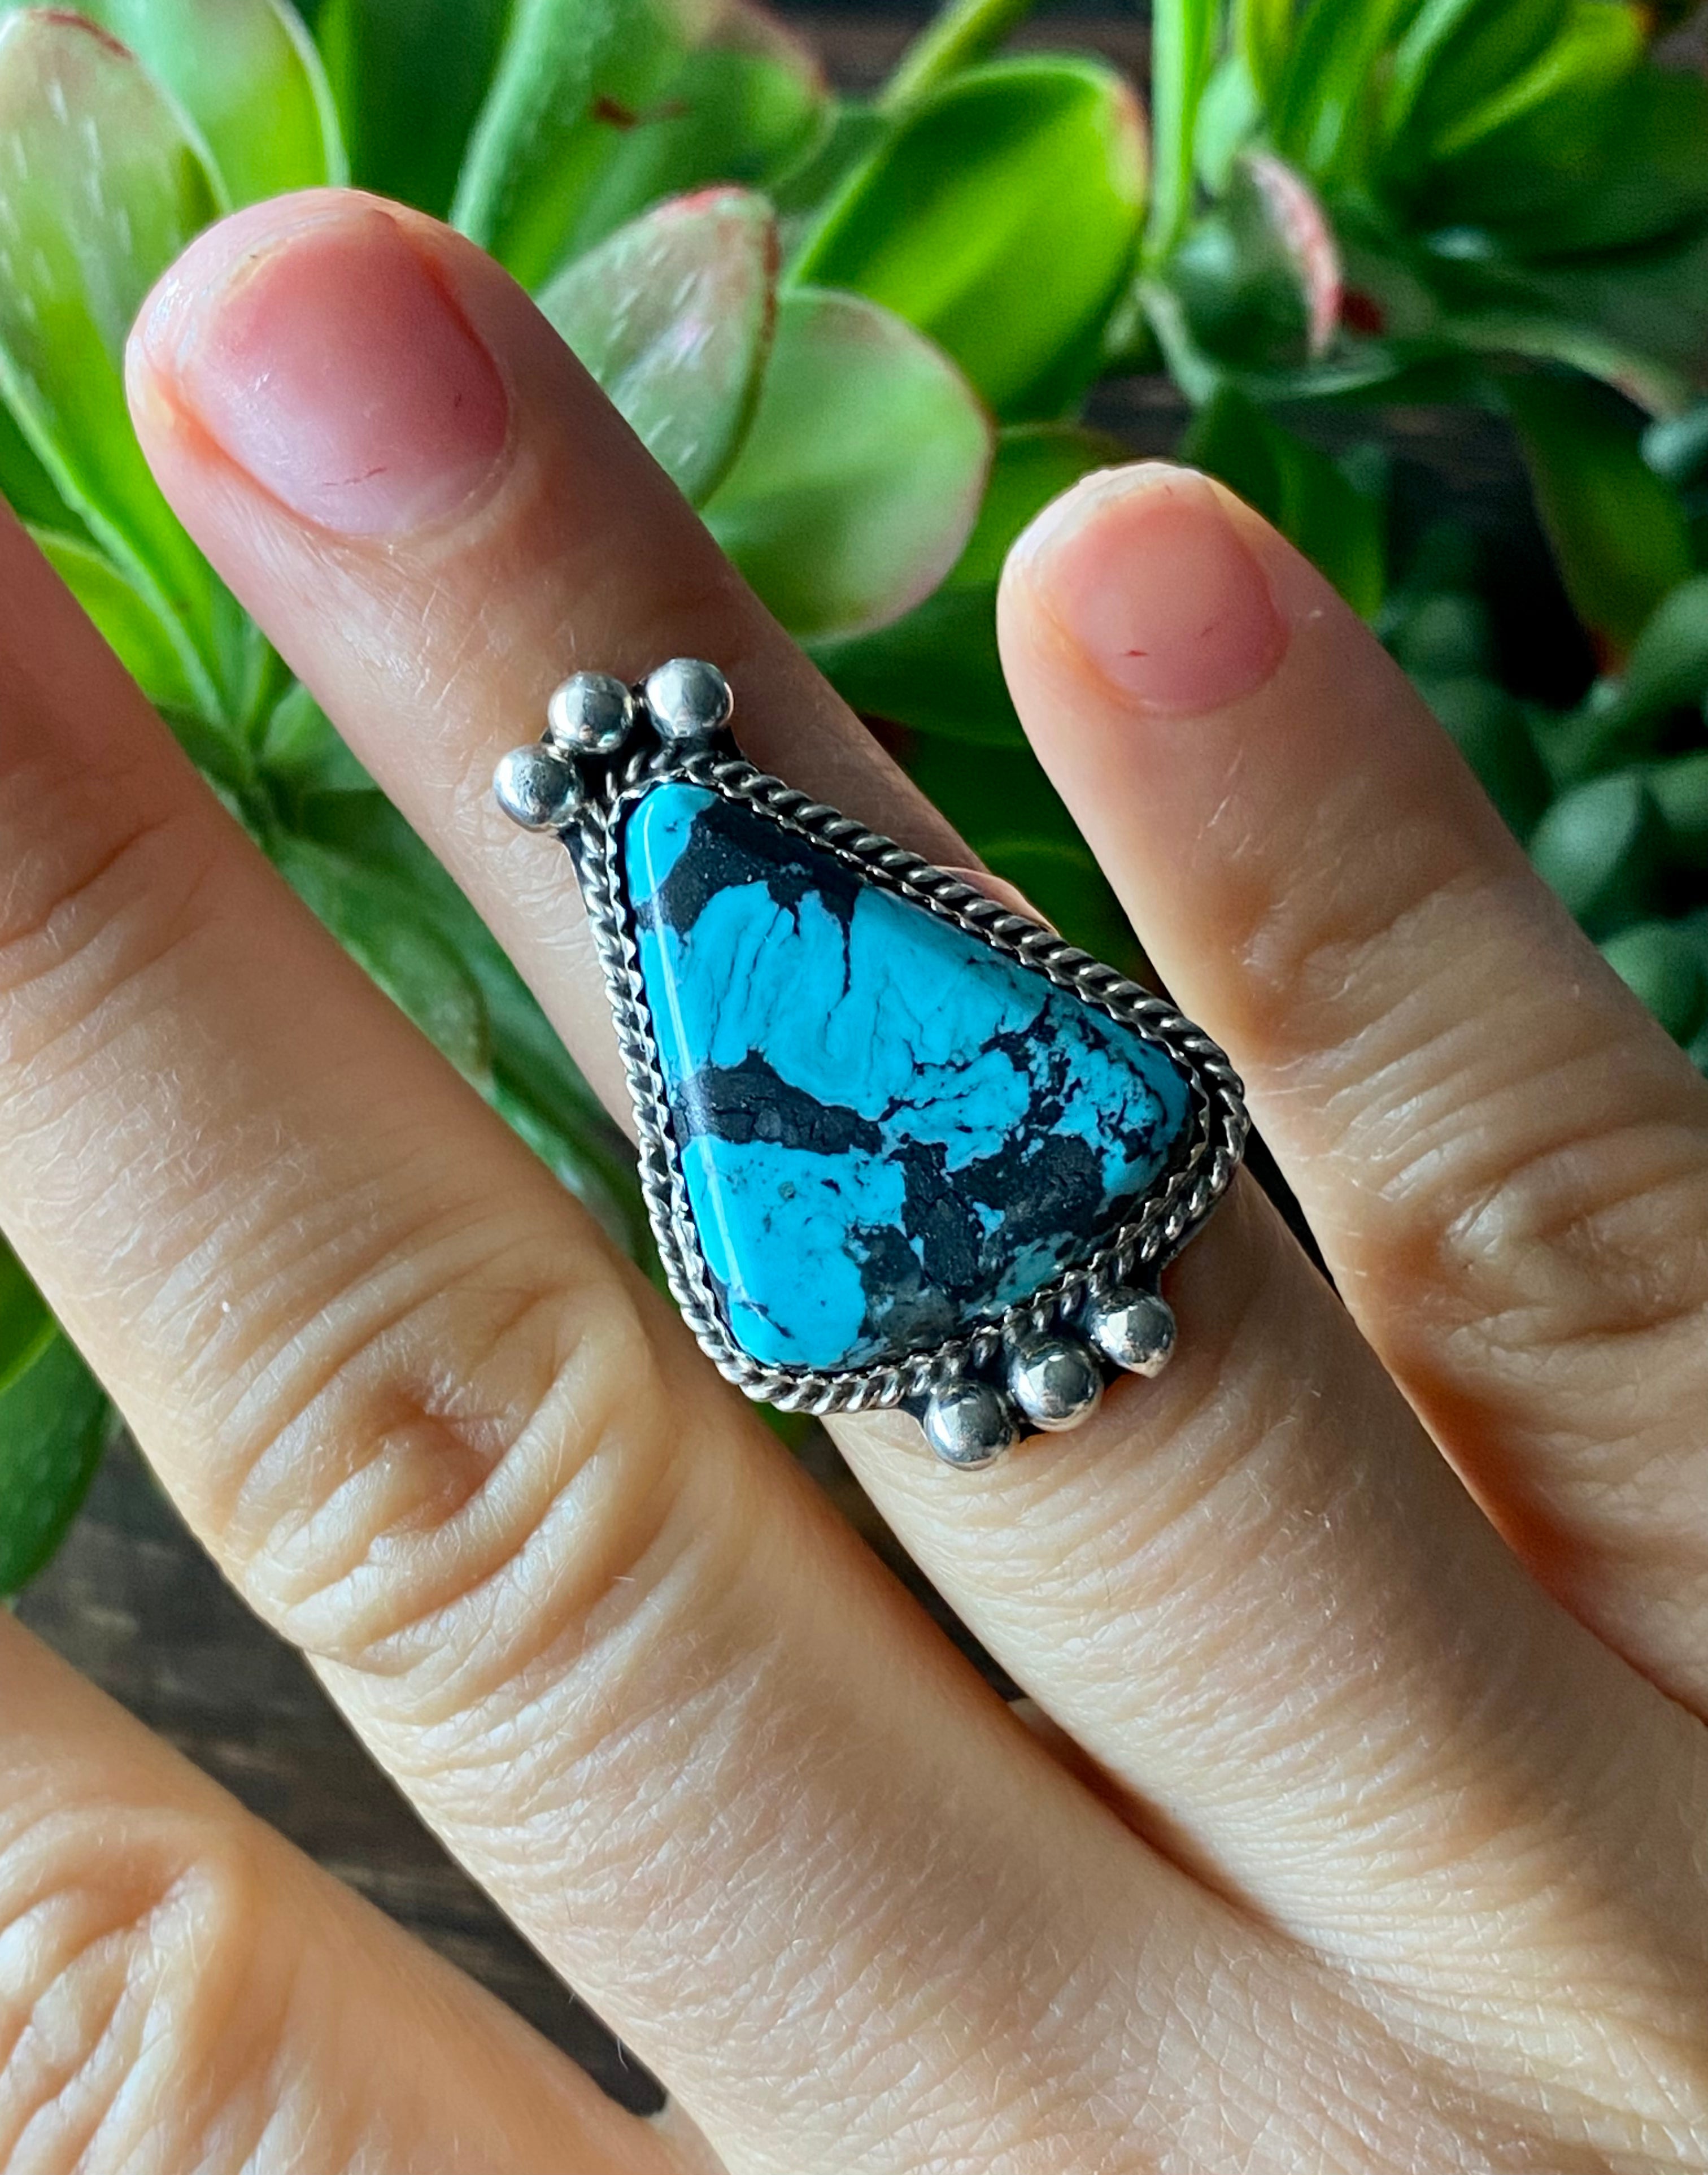 Navajo Made Kingman Turquoise & Sterling Silver Ring Size 6.5